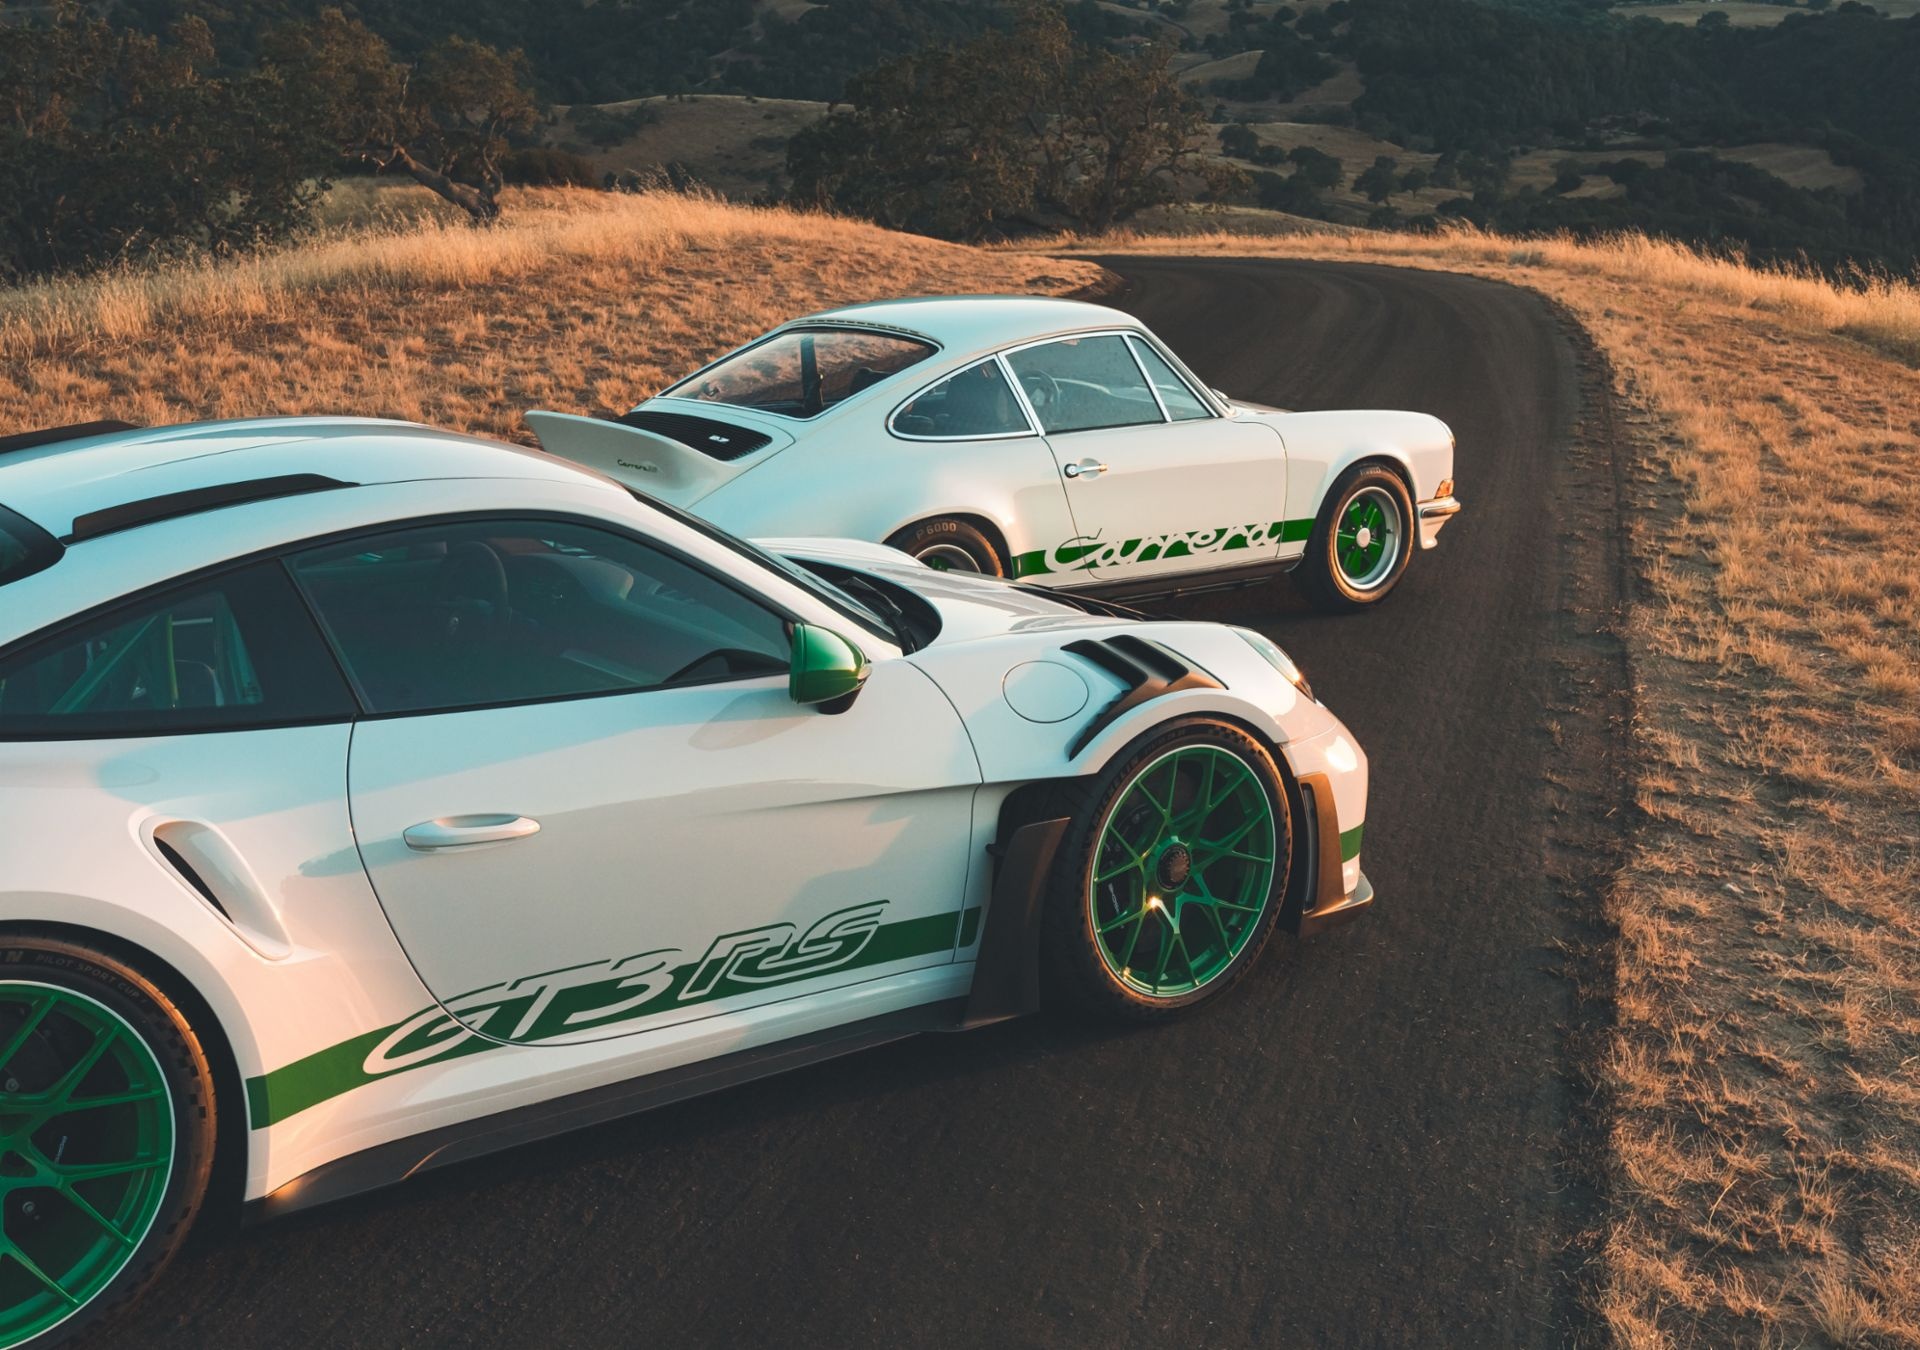 Porsche pays tribute to Carrera RS 2. 7, Special edition 911 GT3 RS, Exclusive and powerful, 1920x1350 HD Desktop